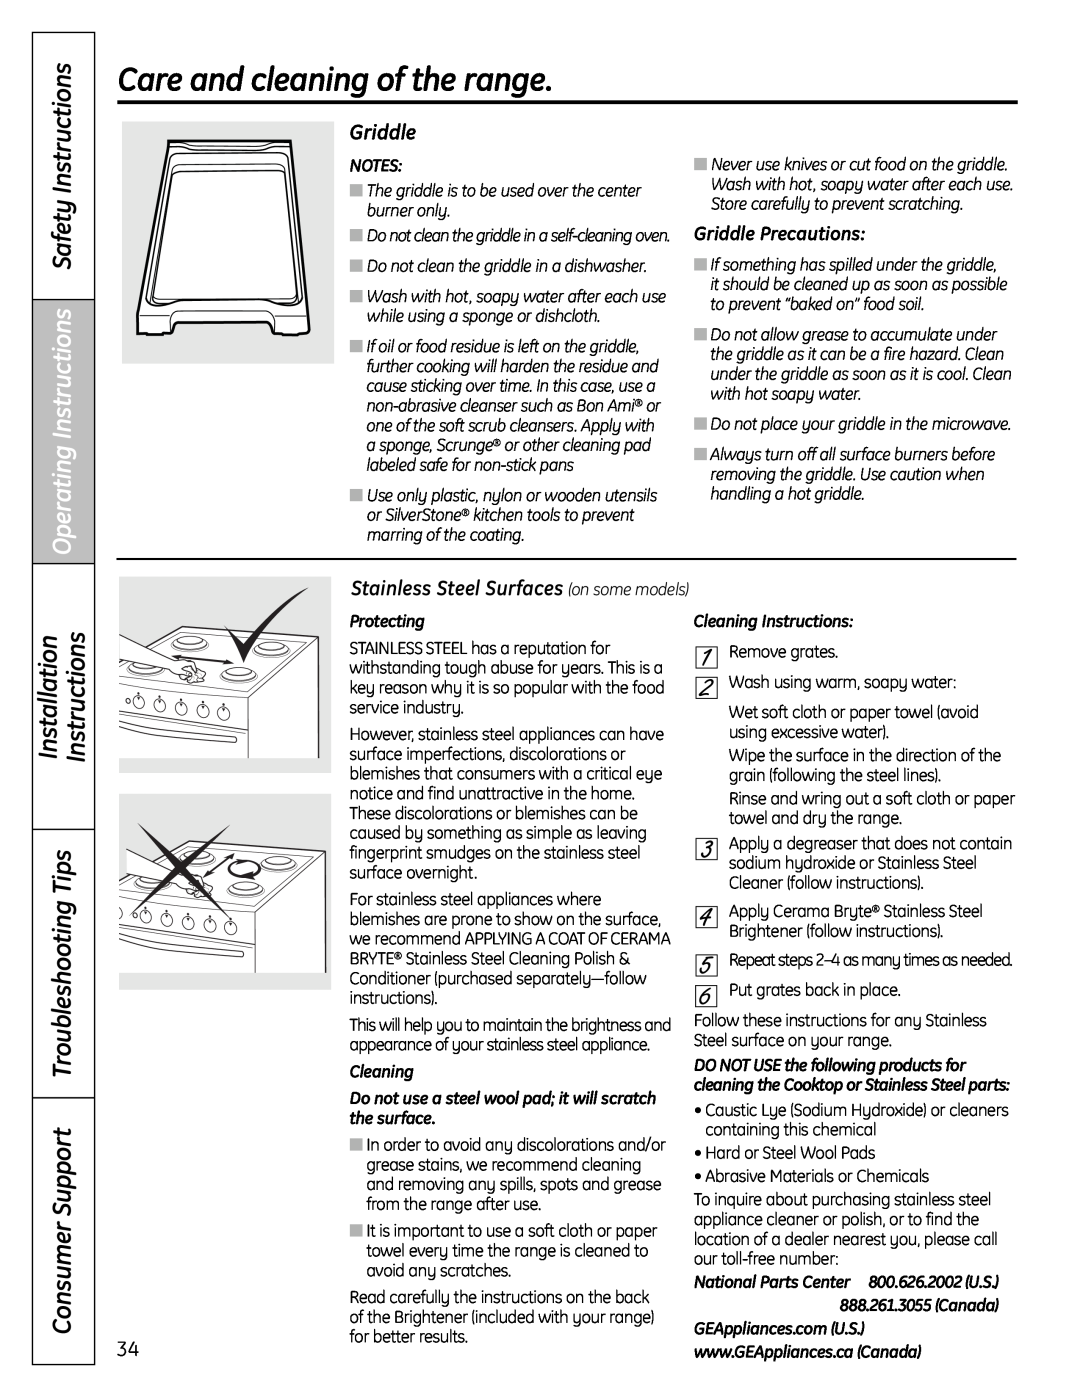 GE 49-85167-1, C2S980 manual Operating Instructions Safety Instructions, Griddle, Stainless Steel Surfaces on some models 